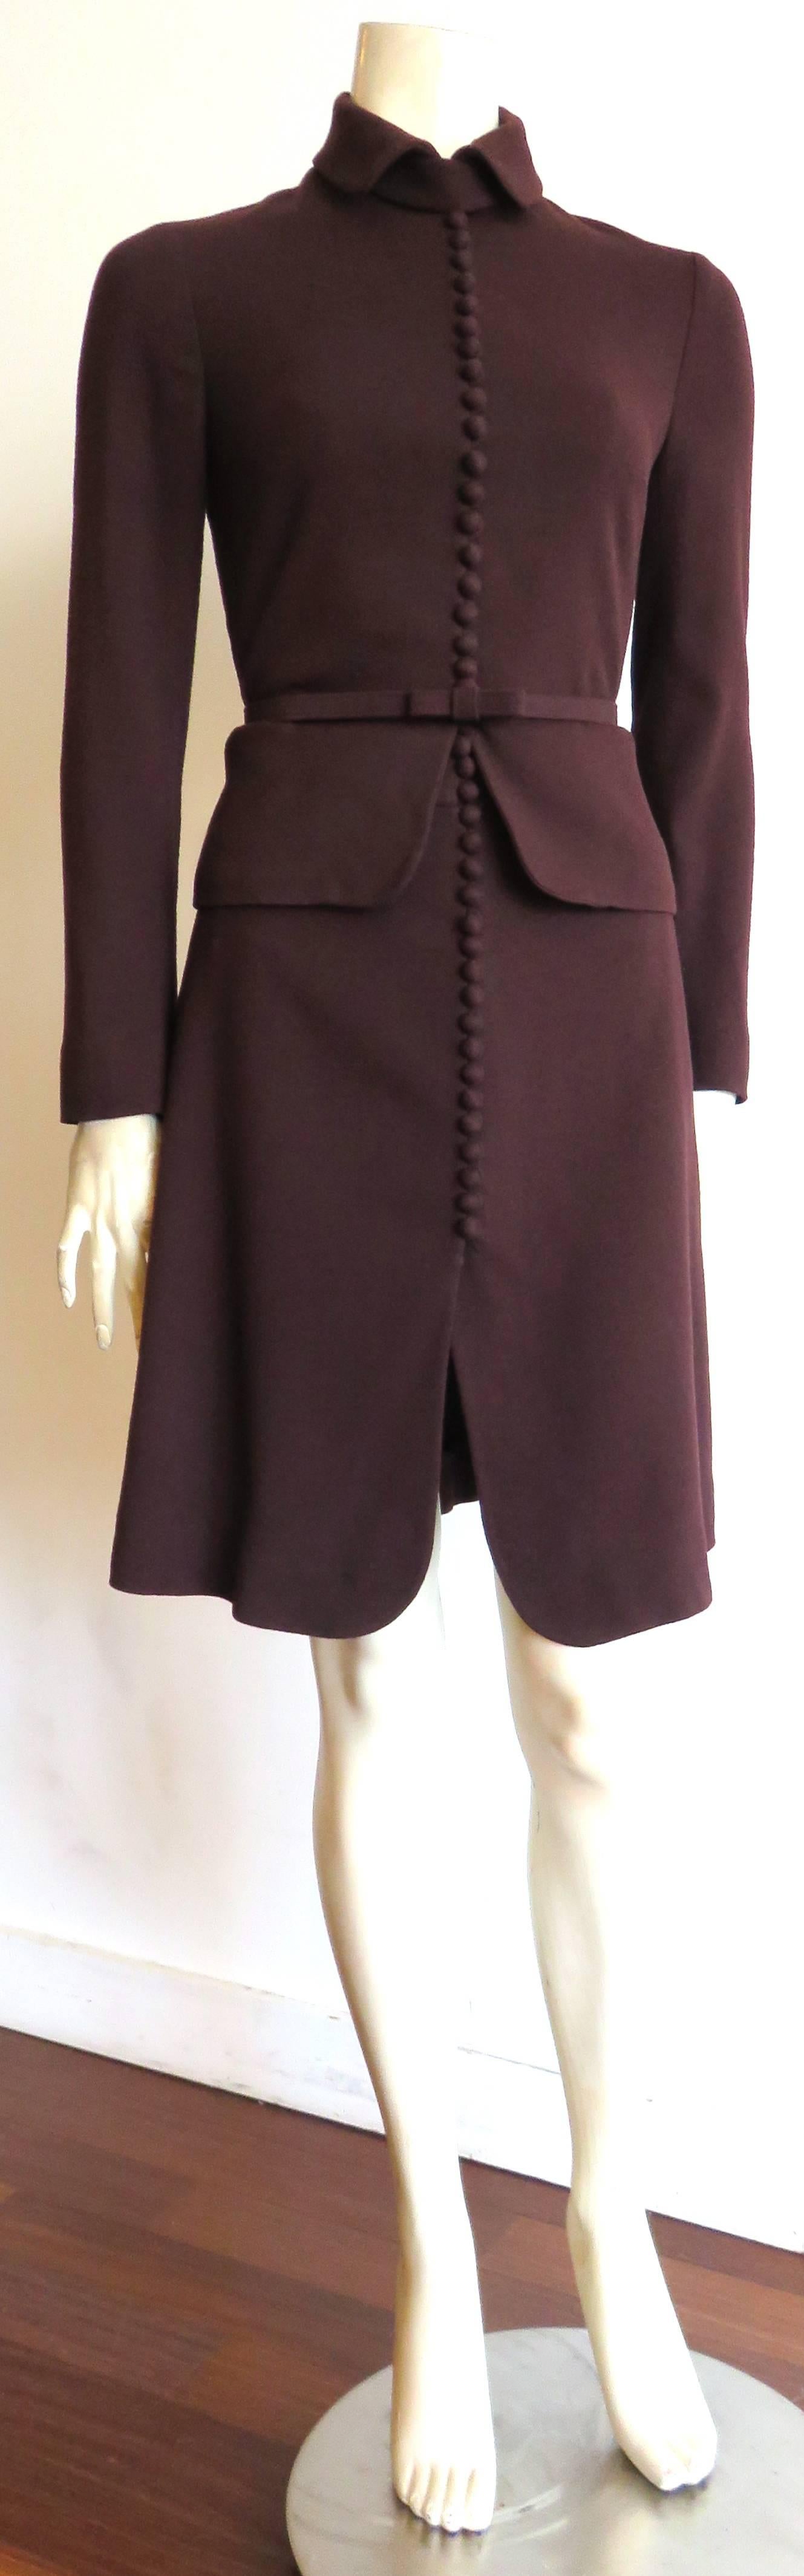 Excellent condition, VALENTINO, burgundy, wool crepe, button detail 2pc. skirt suit set.

The jacket features a victorian inspired, '20-buttons' front opening placket with neck, storm flap.

Matching, skinny, bow belt at the waist.

Skit